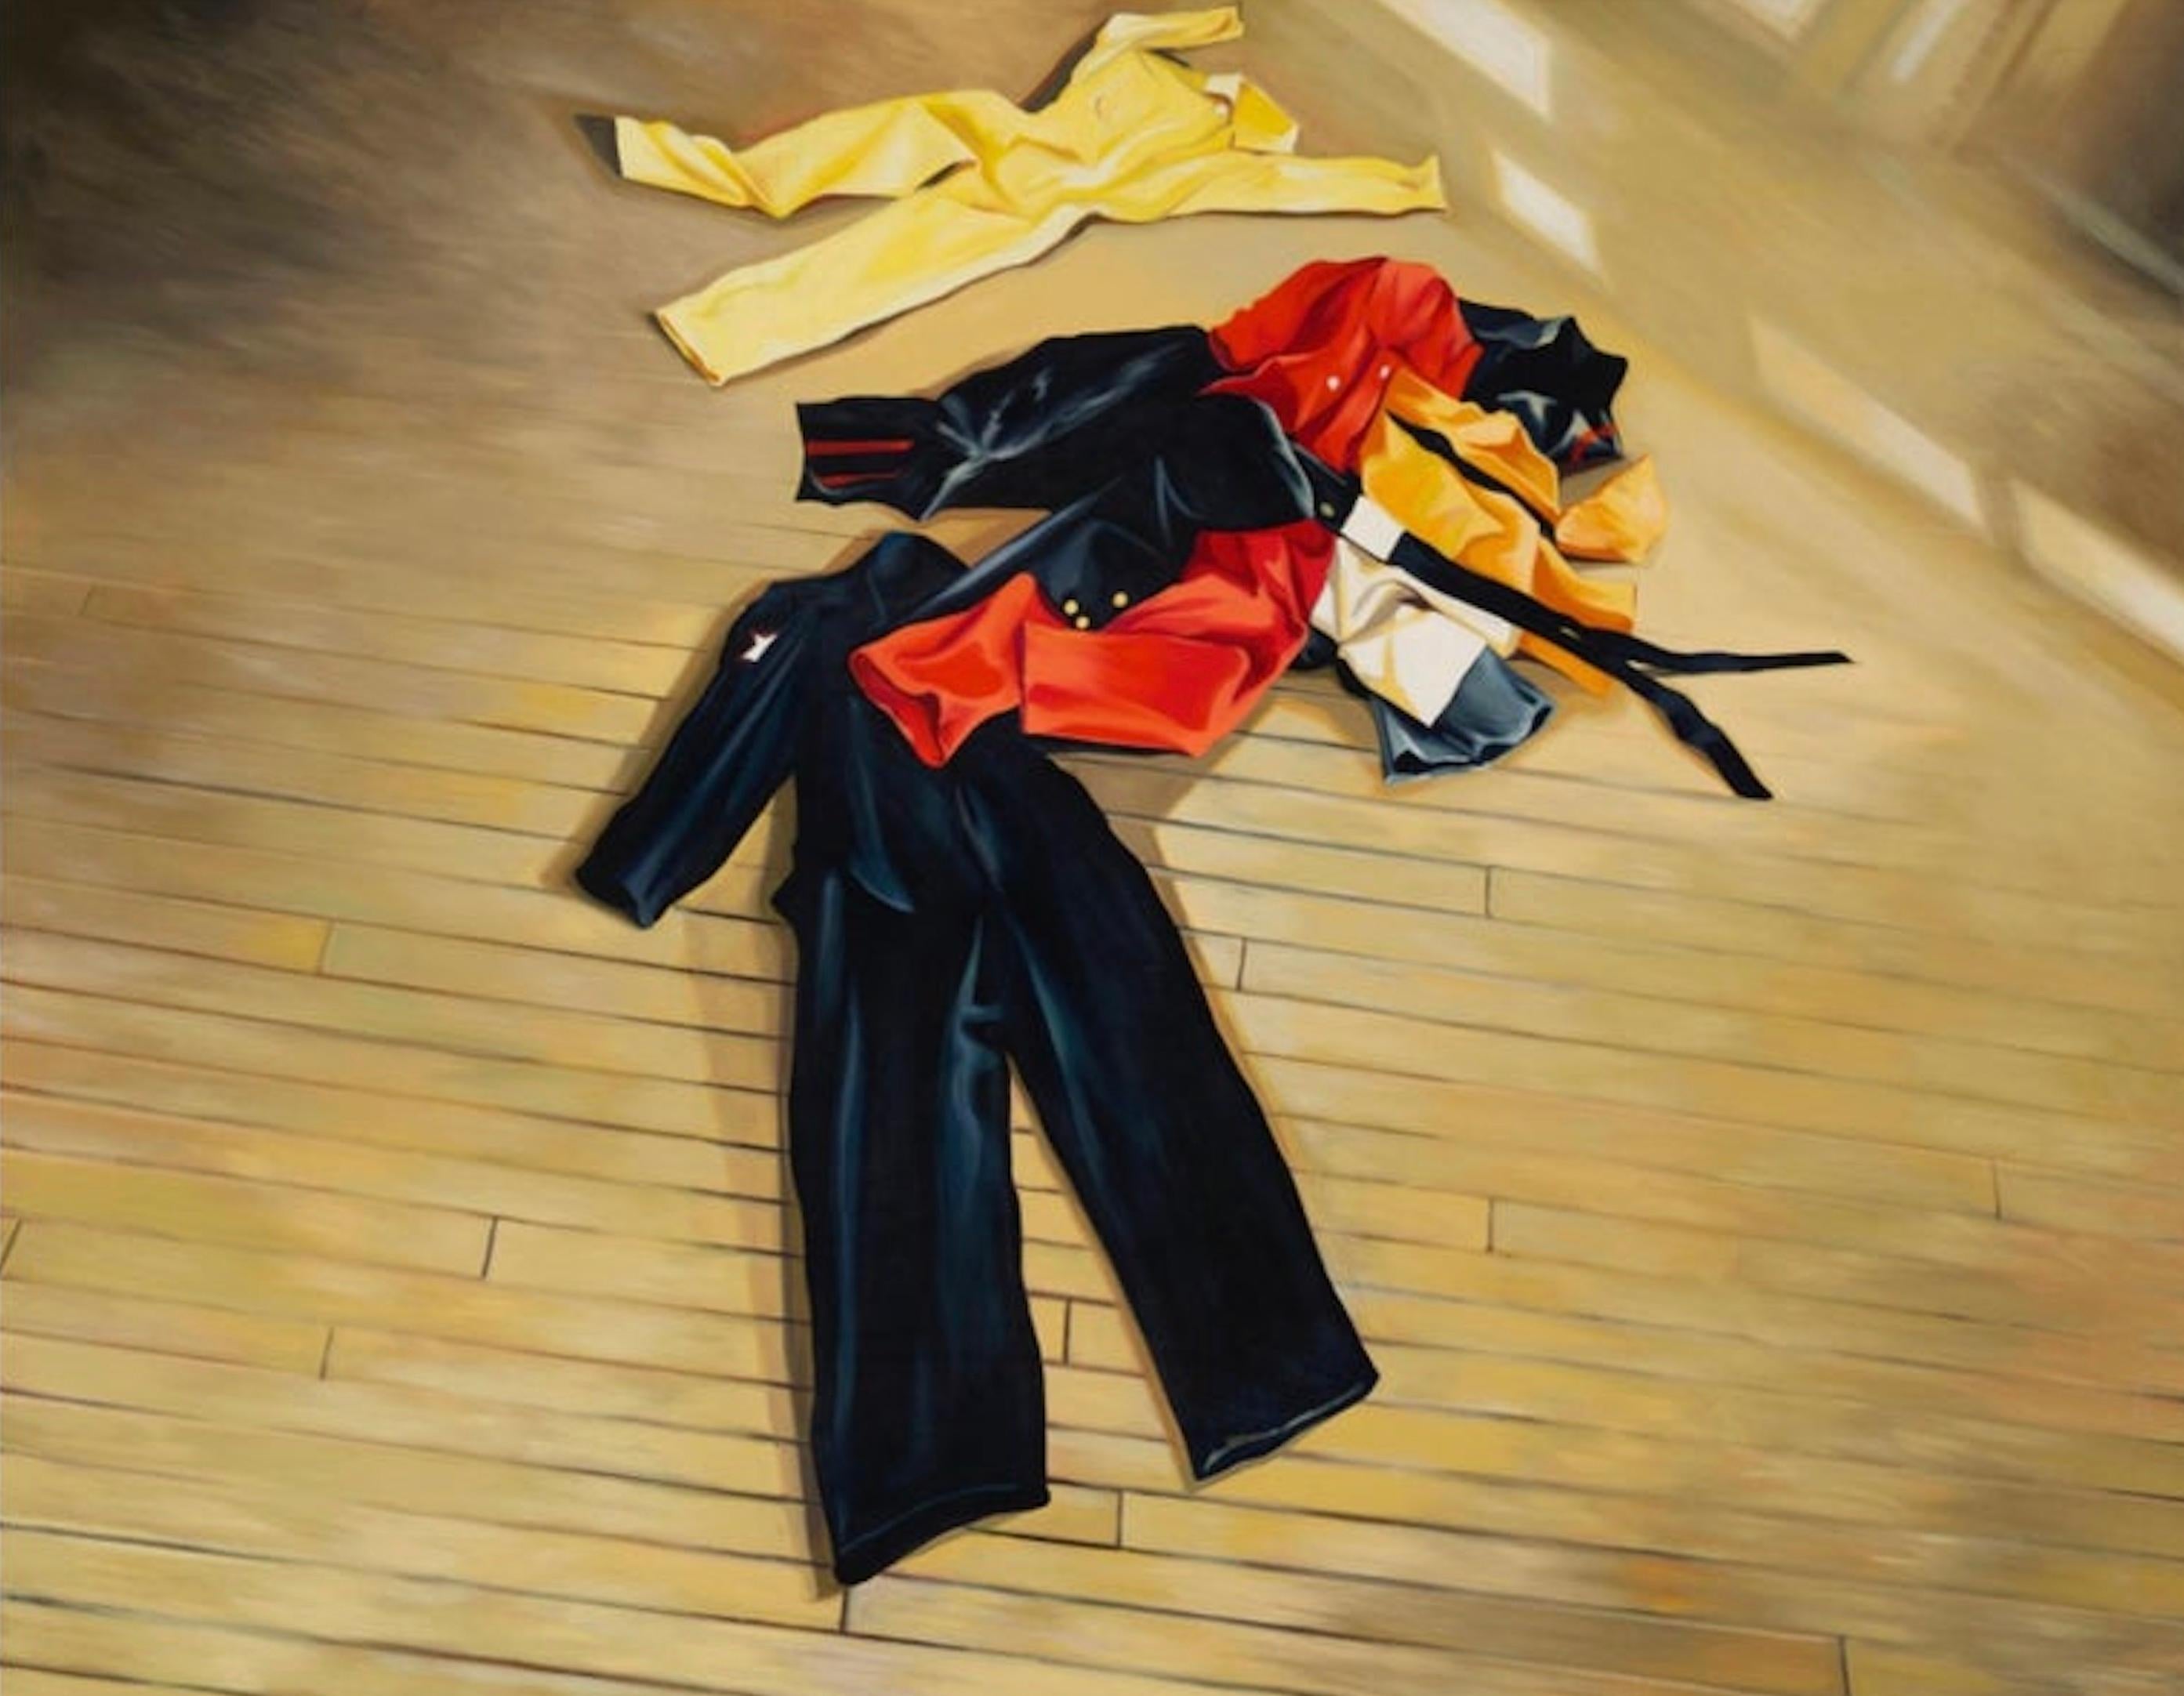 Artist: Lowell Nesbitt (1933-1993)
Title: Work Clothes On Studio Floor
Year: 1974
Medium: Oil on canvas
Size: 70 x 90 inches
Condition: Good
Inscription: Signed, dated, titled by the artist, verso

LOWELL NESBITT (1933-1993) One of the most